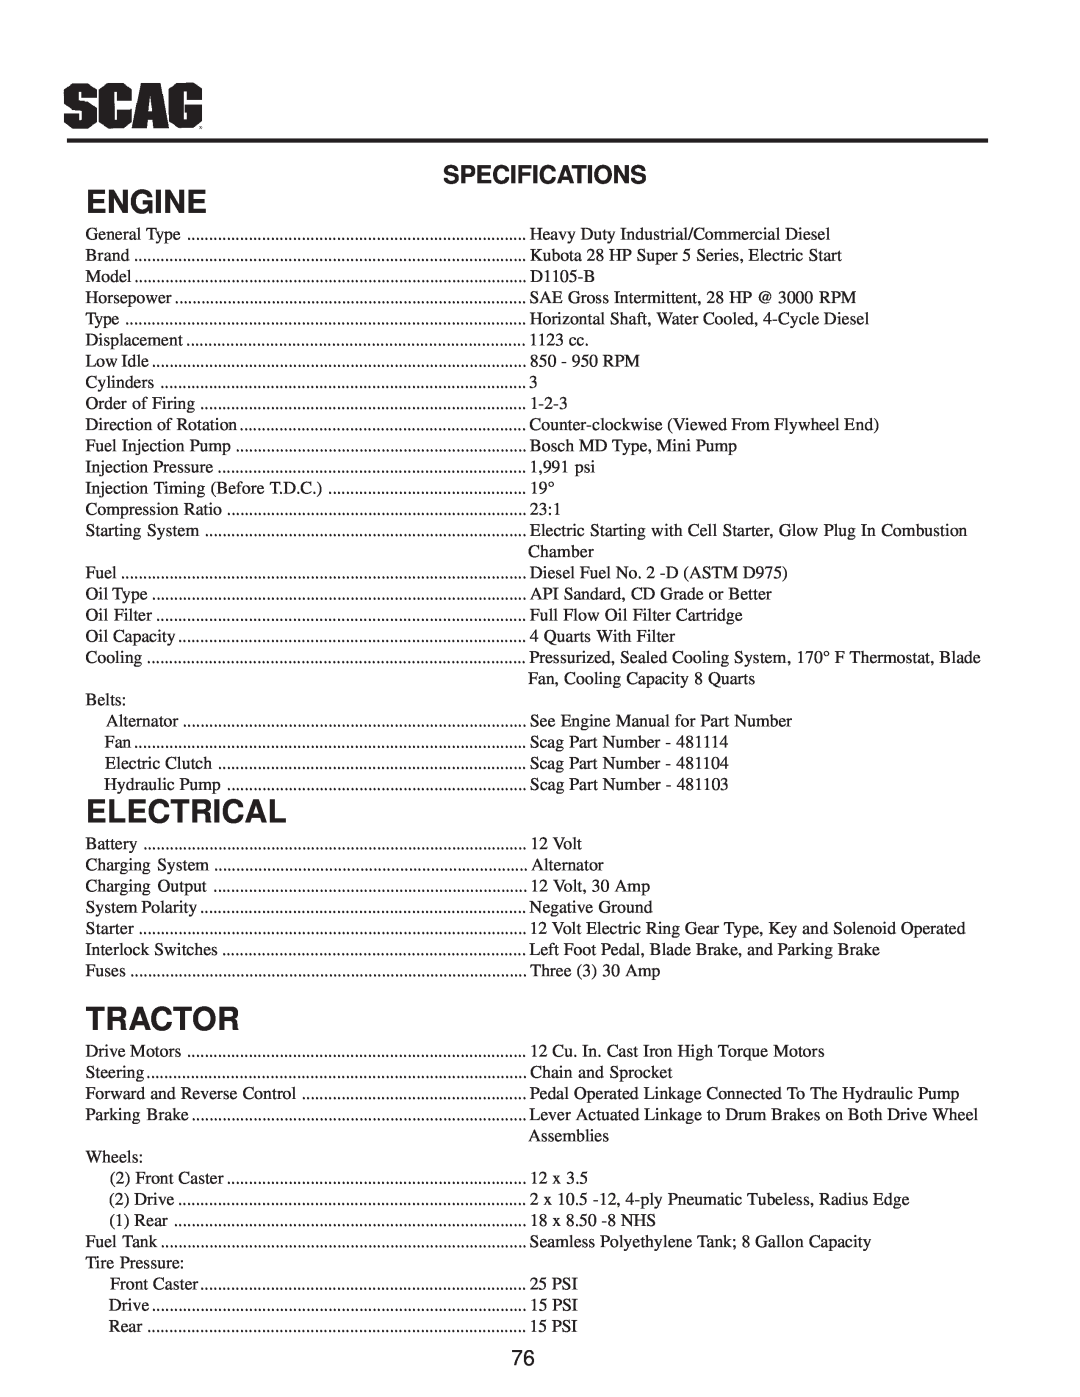 Scag Power Equipment MAG manual Engine, Electrical, Tractor, Specifications 